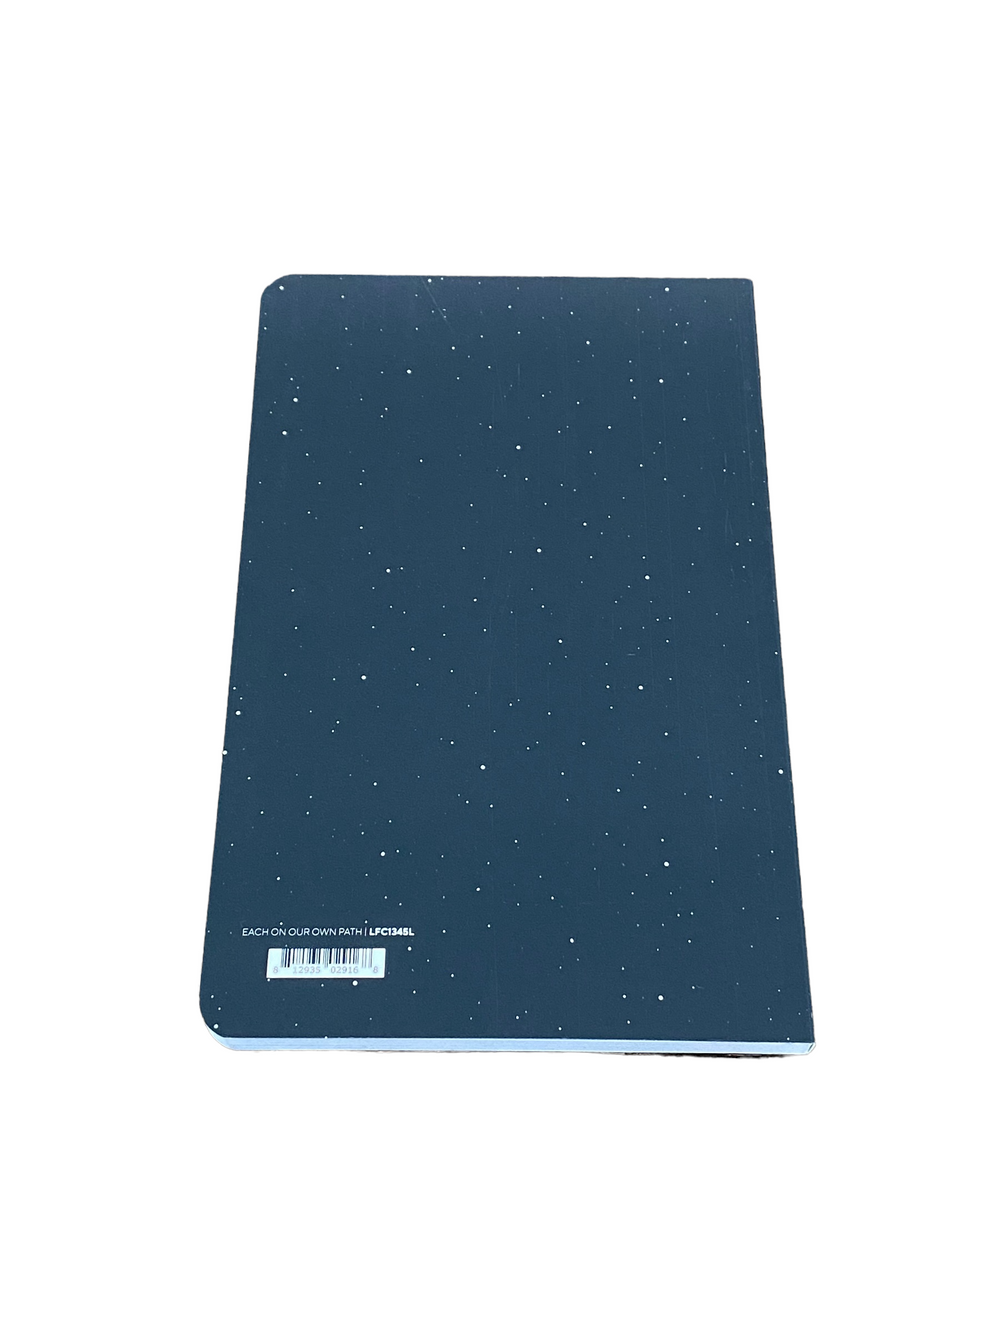 EACH ON OUR OWN PATH NOTEBOOKS - Kingfisher Road - Online Boutique